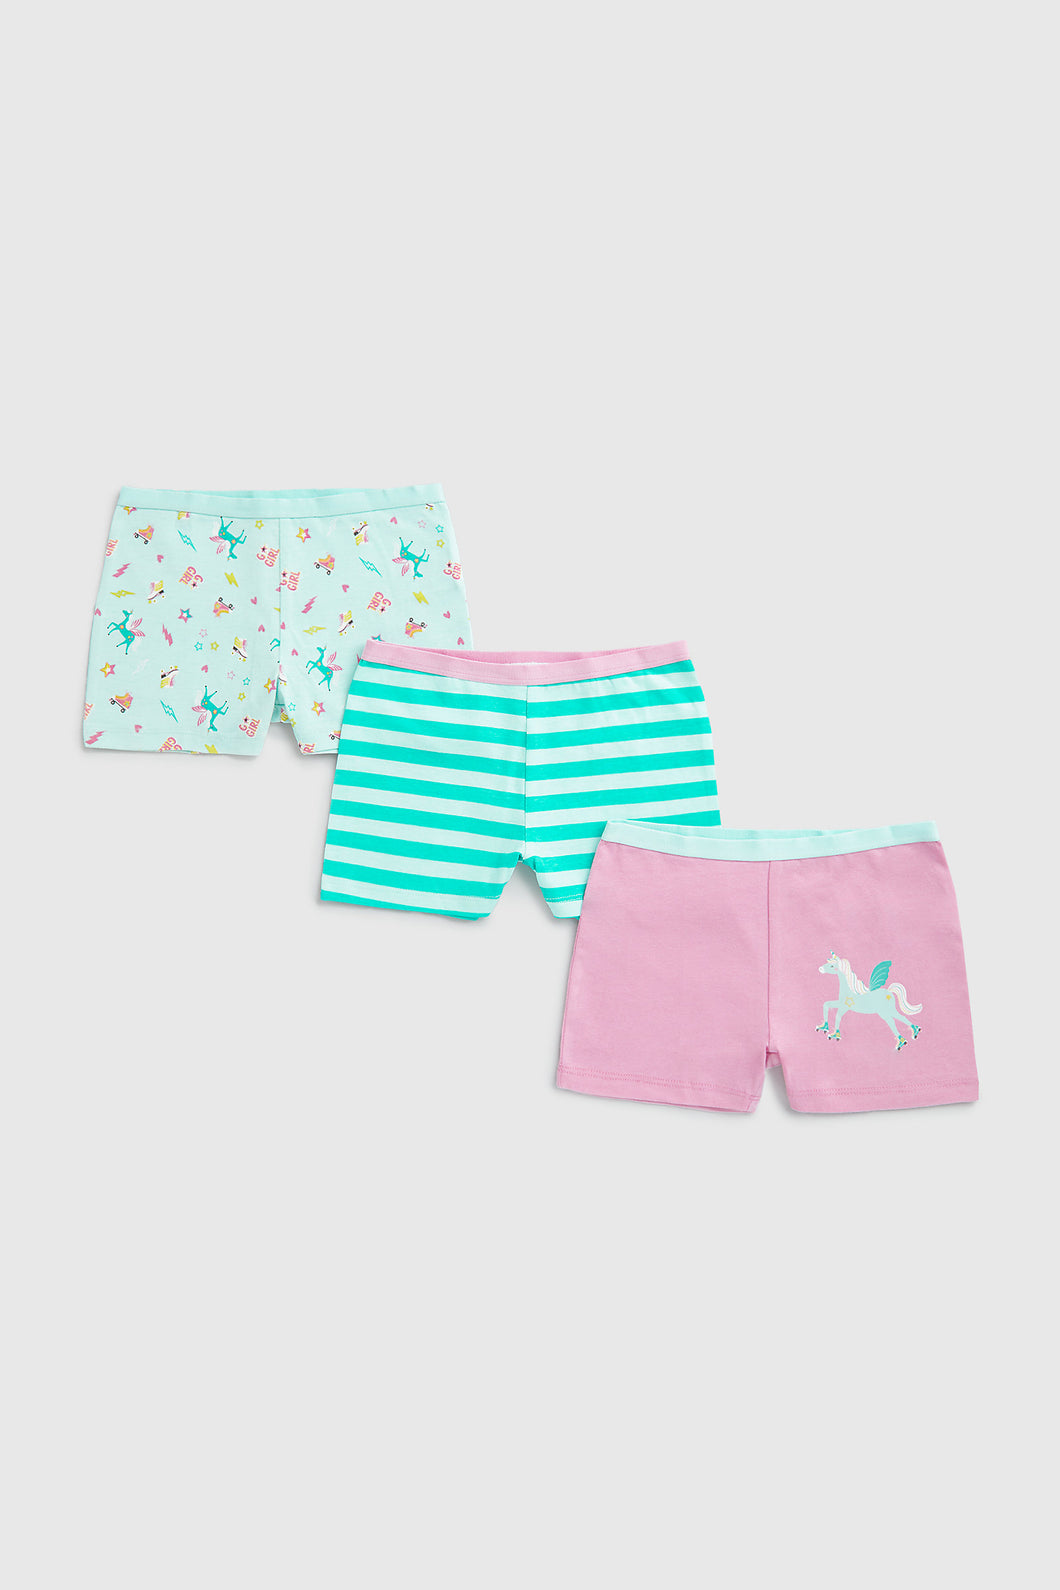 Mothercare Skate Party Short Briefs - 3 Pack